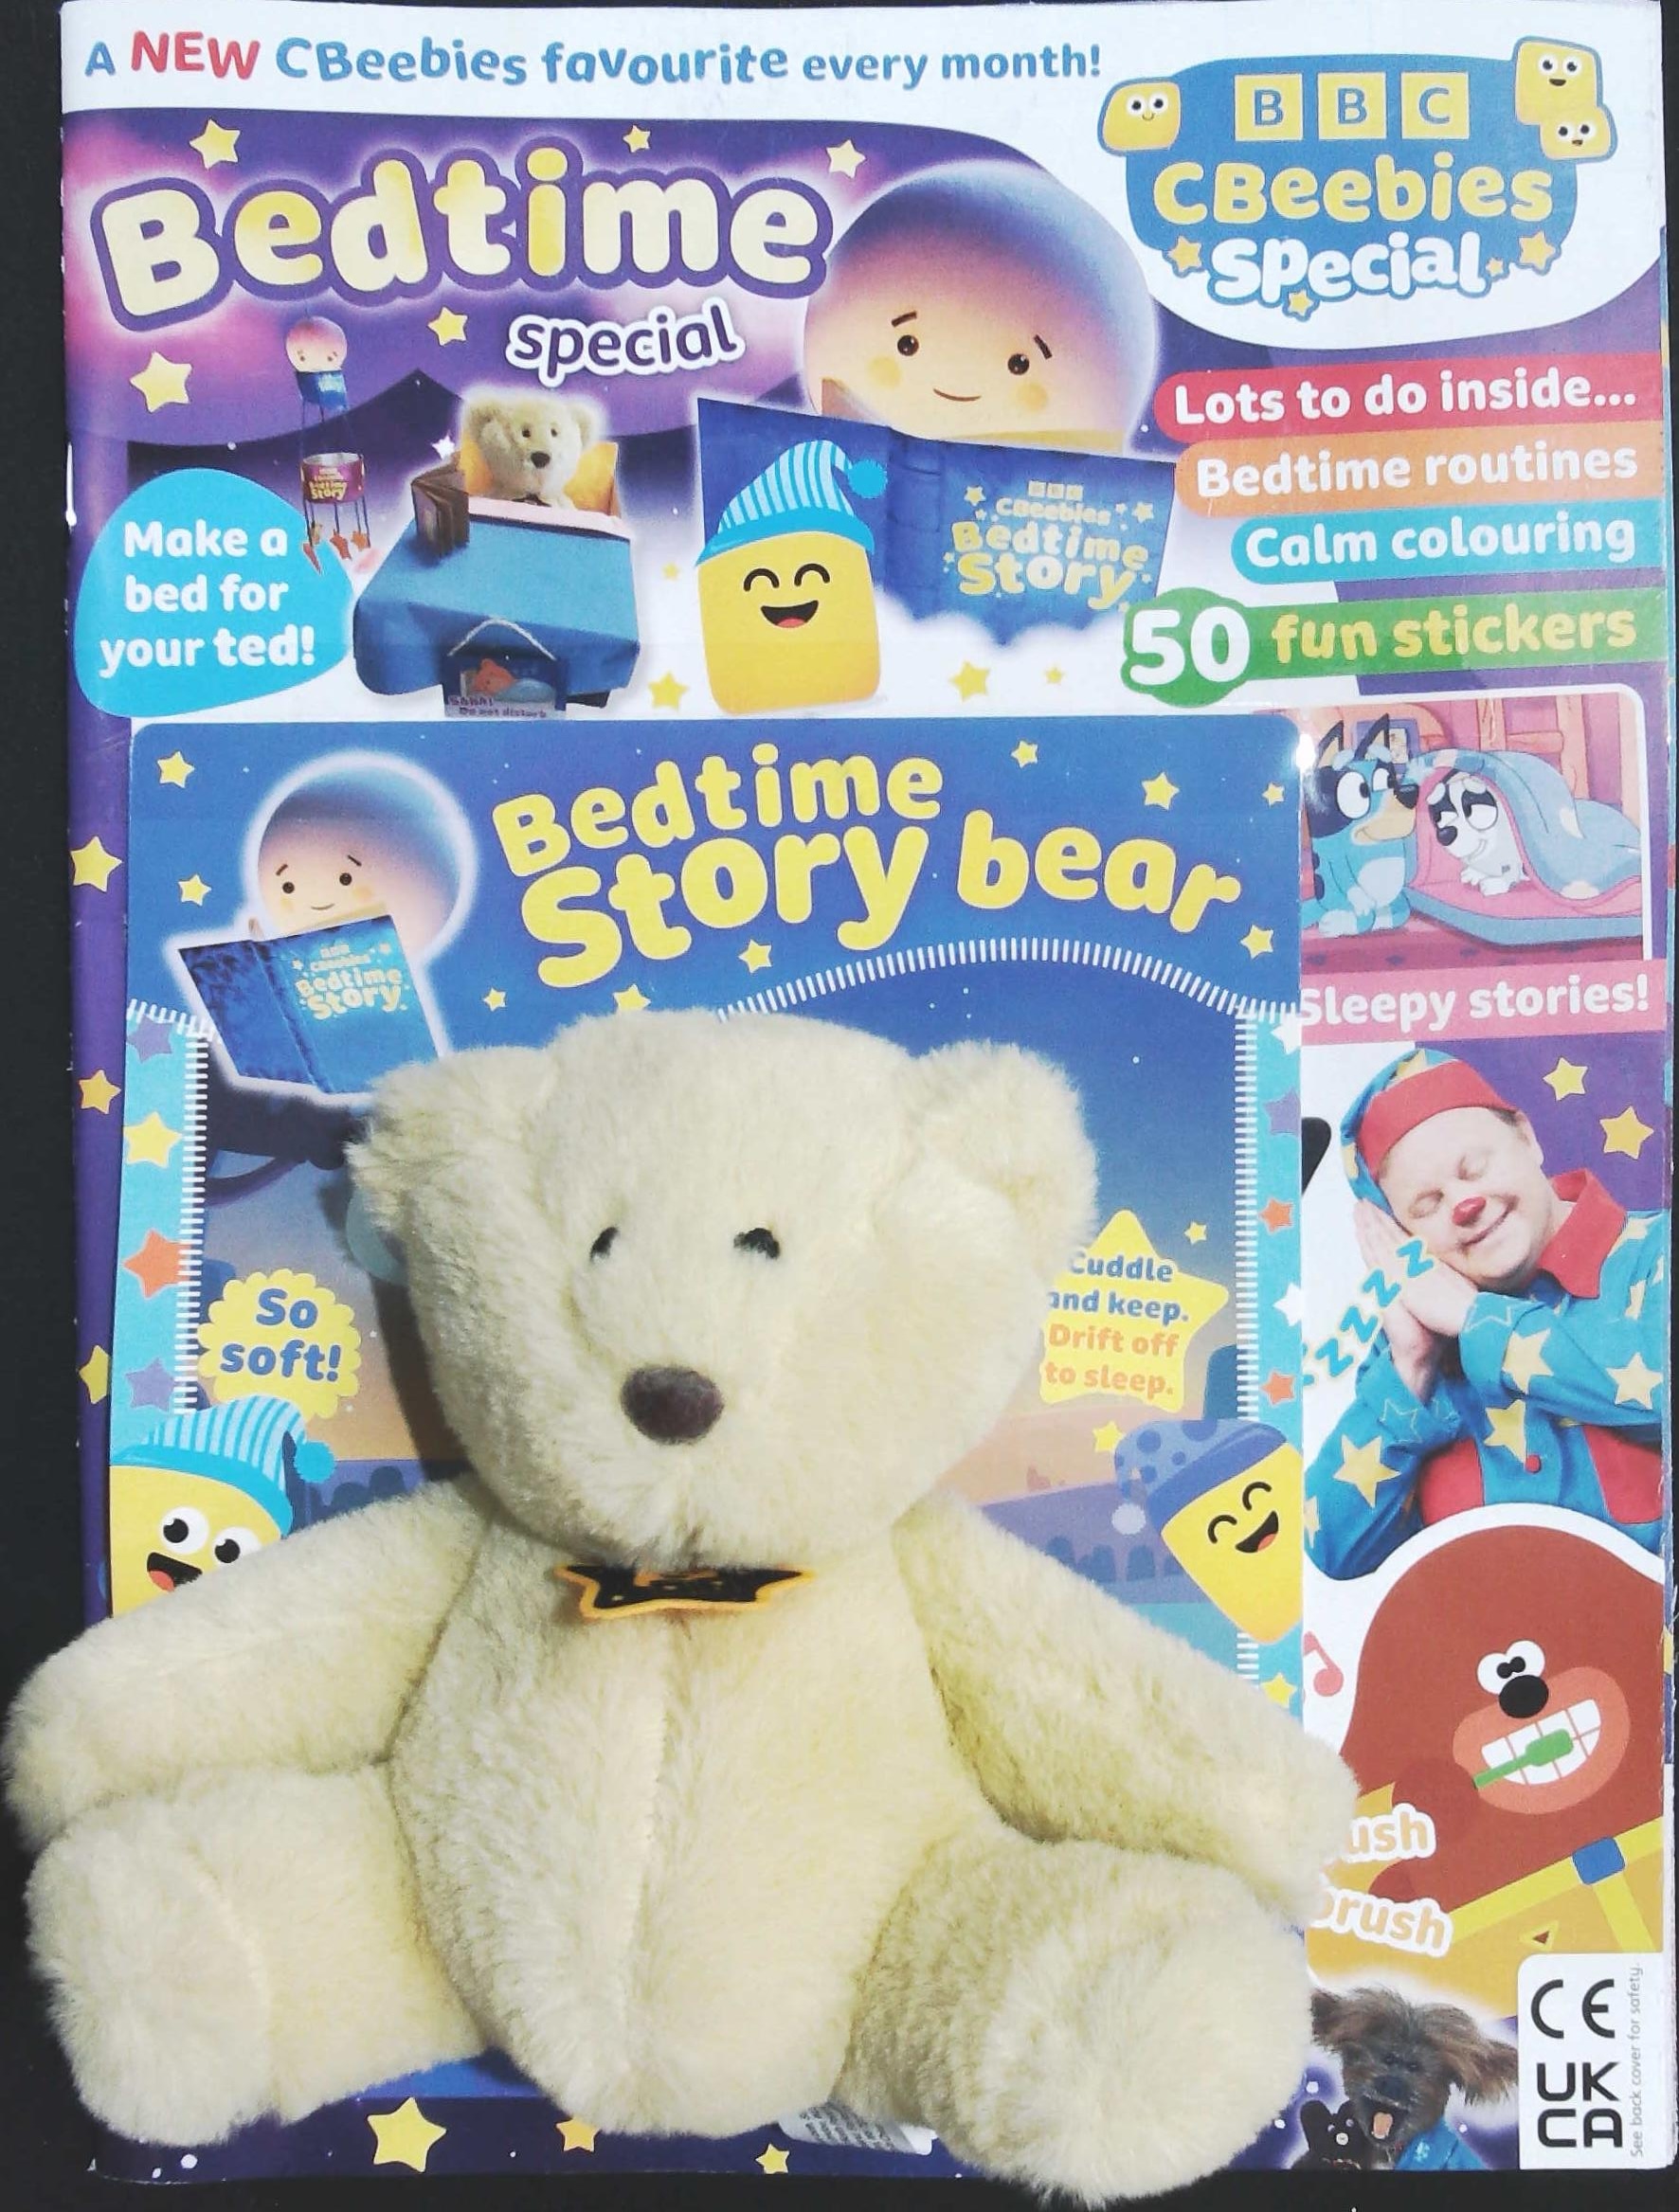 CBEEBIES SPECIAL GIFT